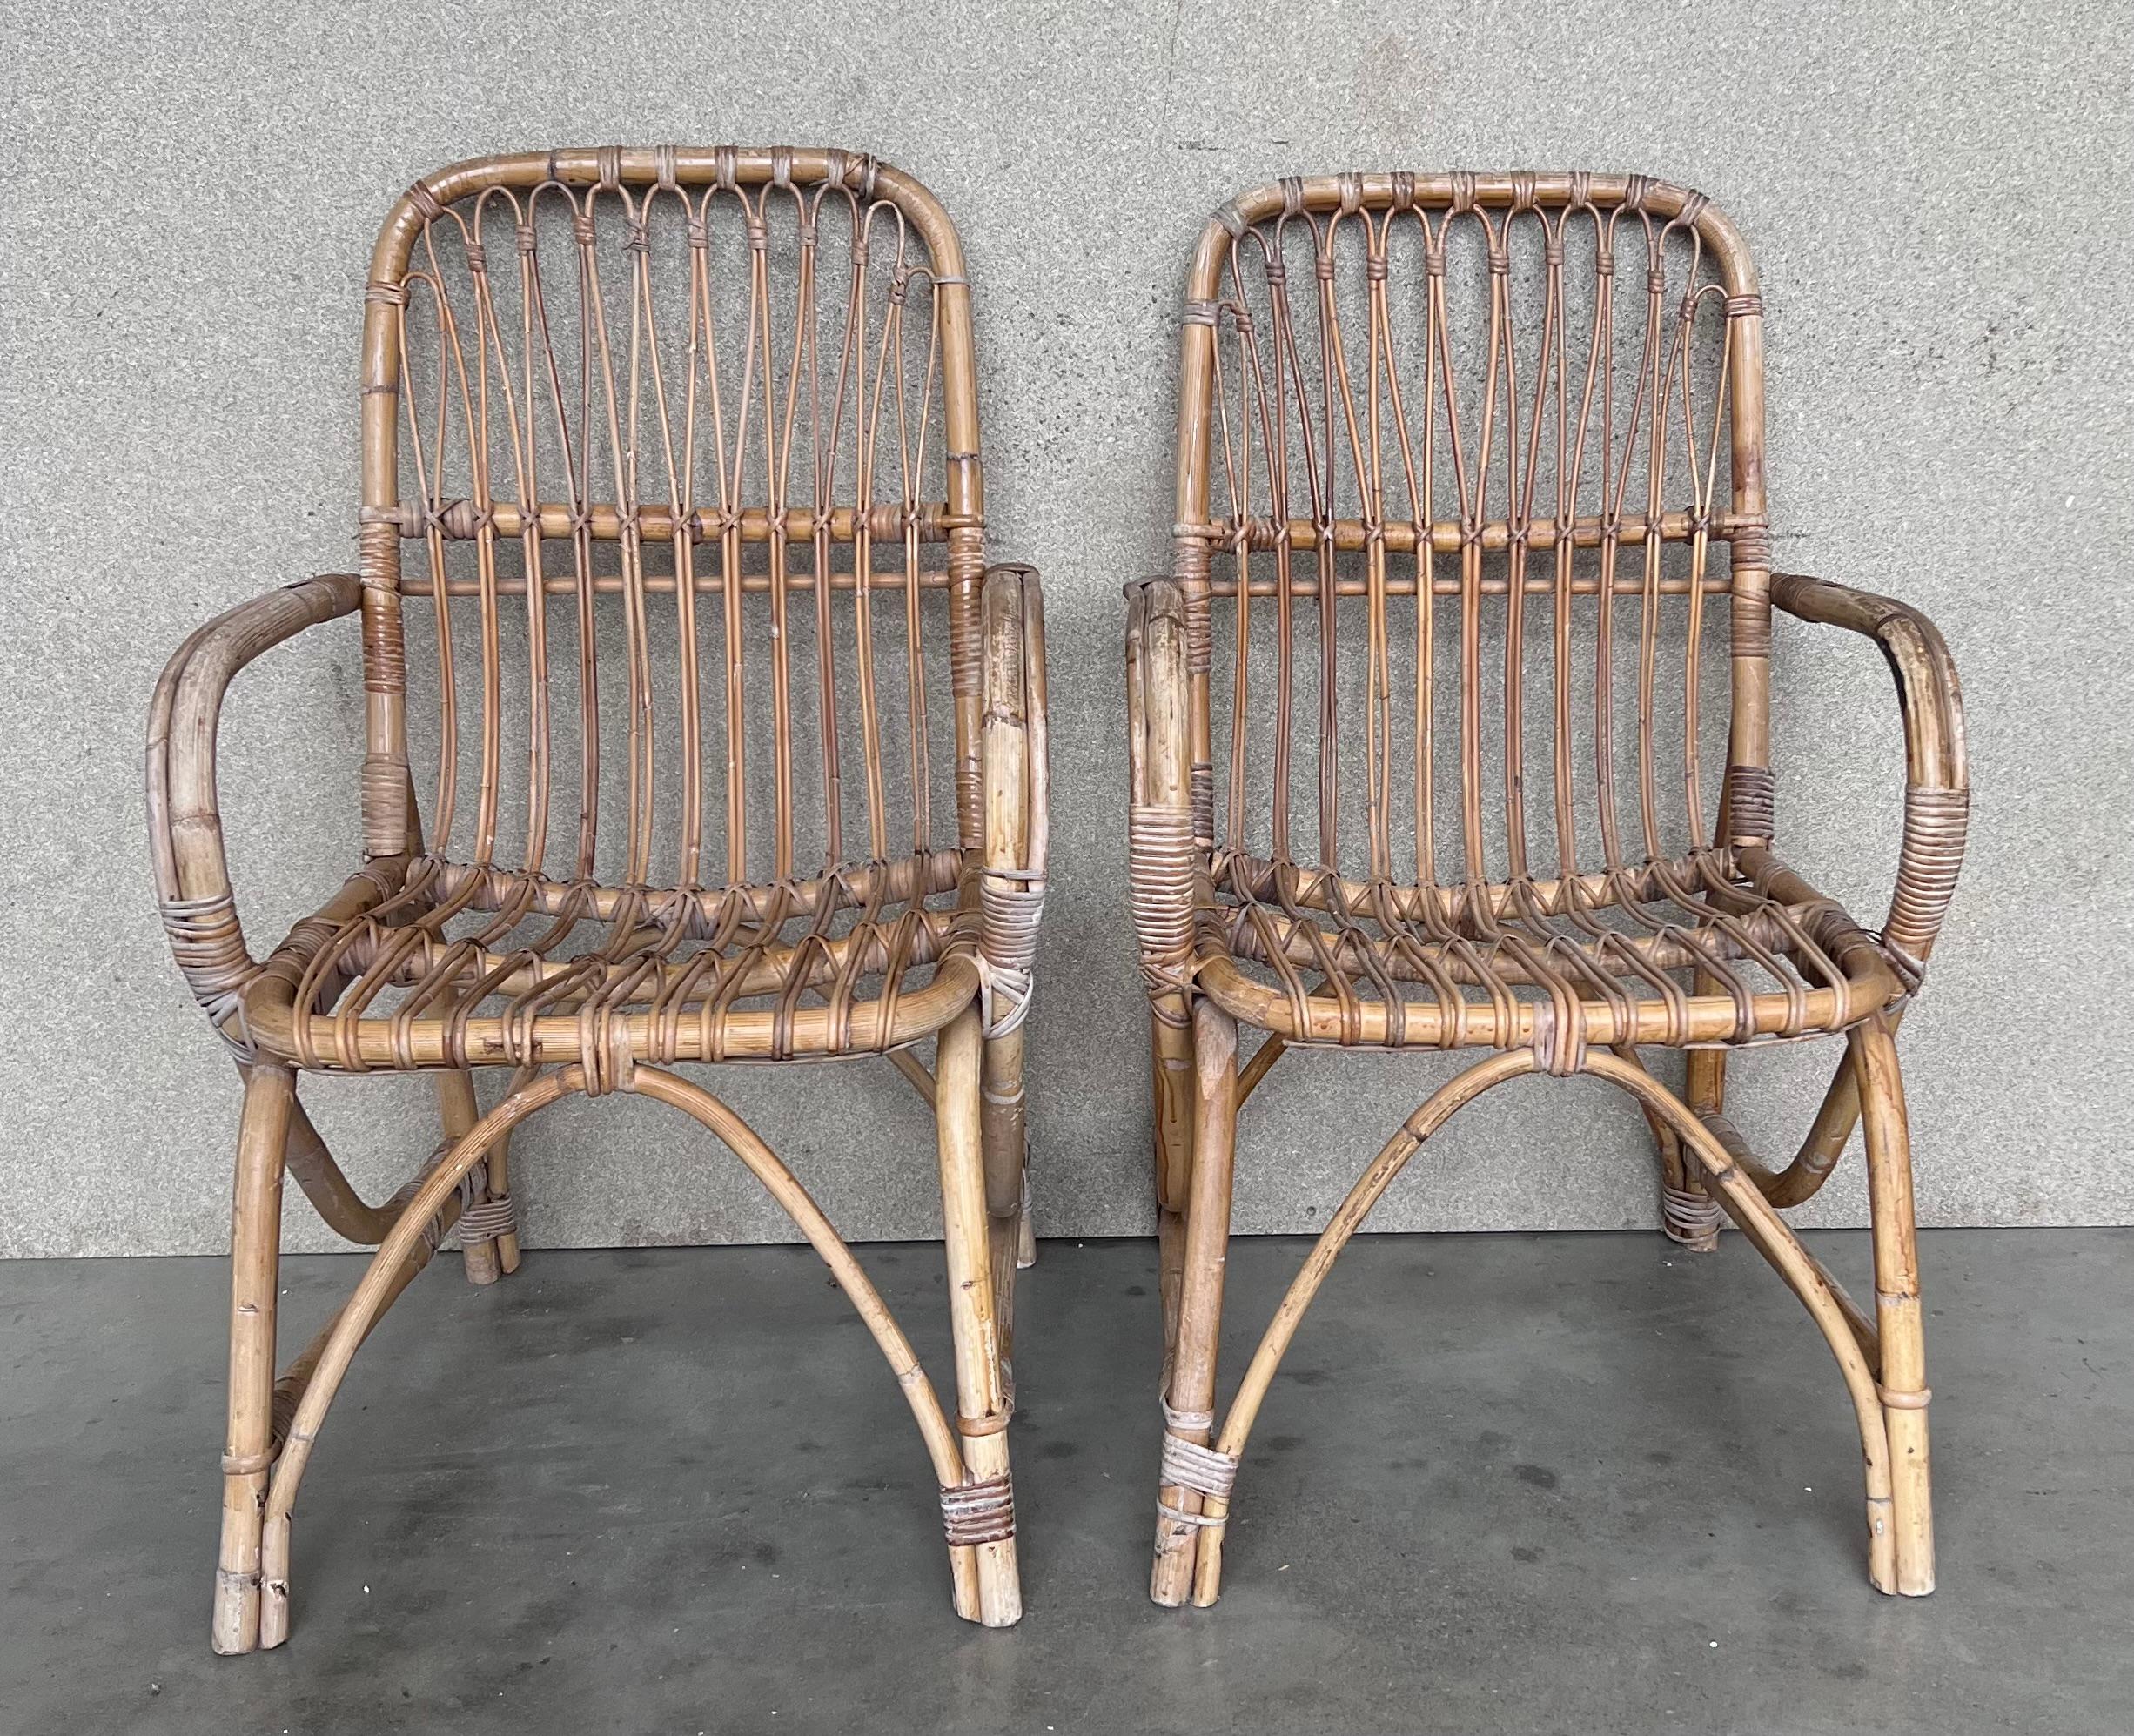 1960s pair of Spanish bamboo armchairs with Rectangular back rest.
Restored.

